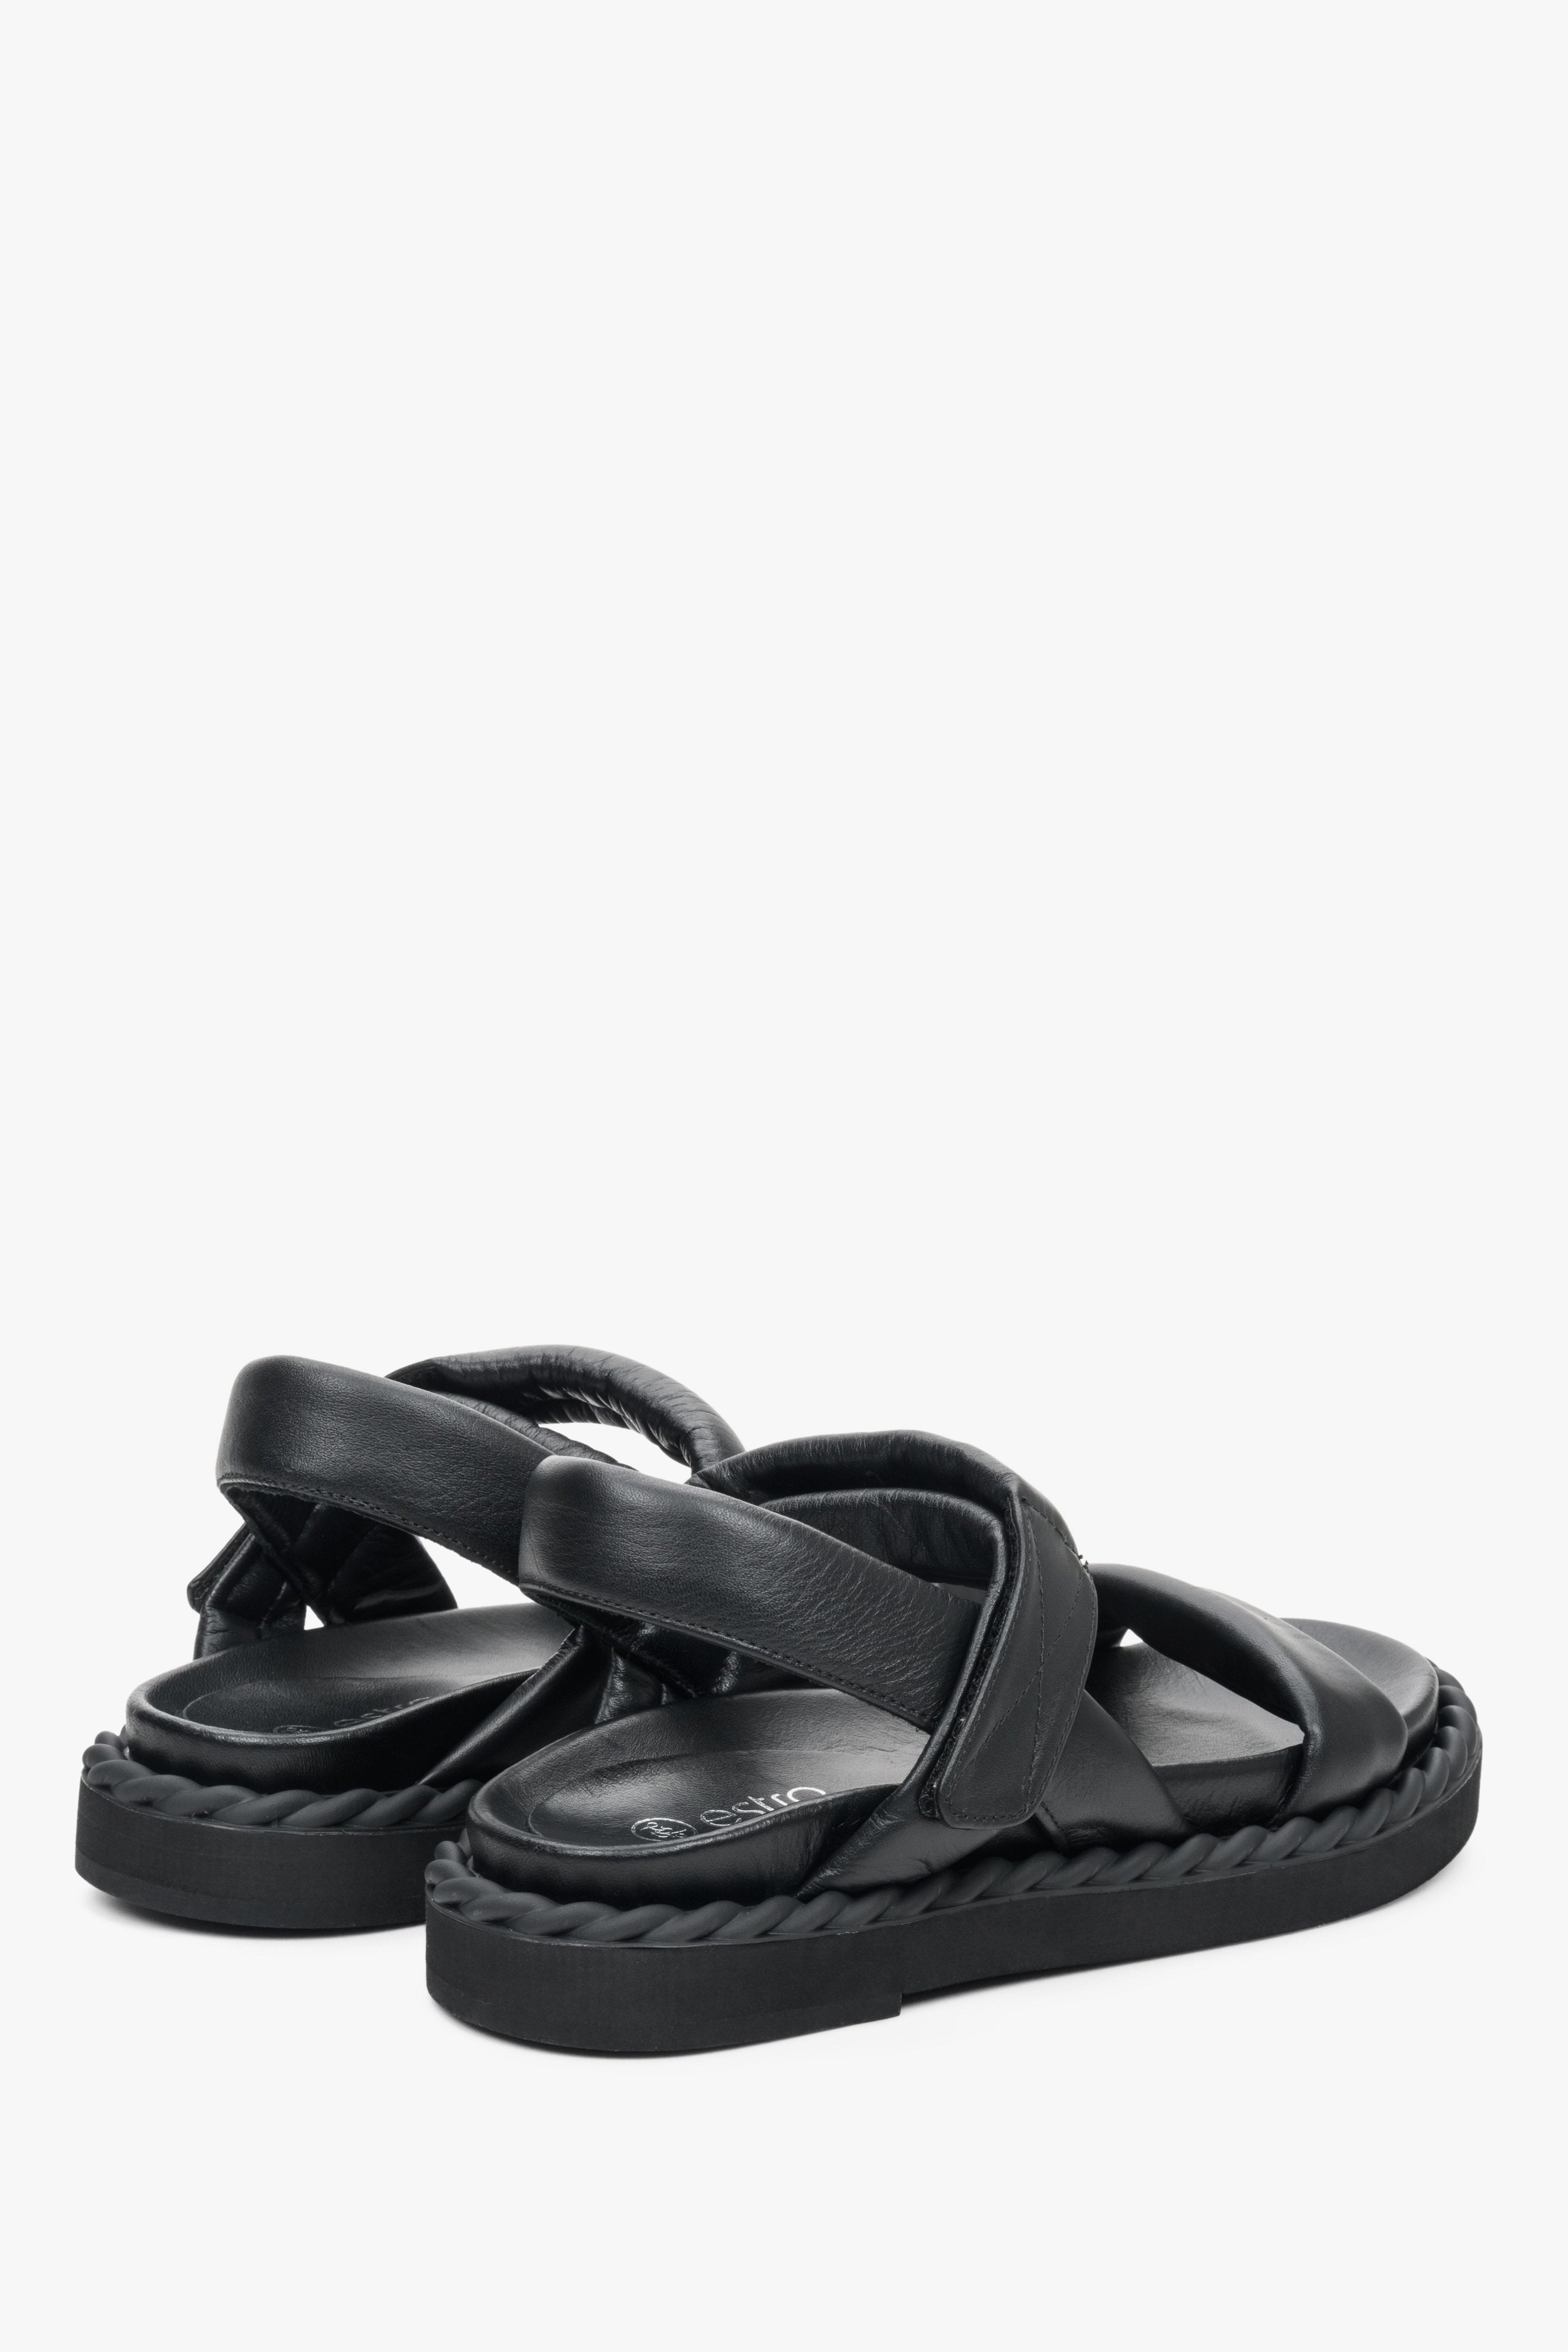 Women's black flat sandals for summer on a comfortable, flexible sole - the presentation of the back and side of the shoes.